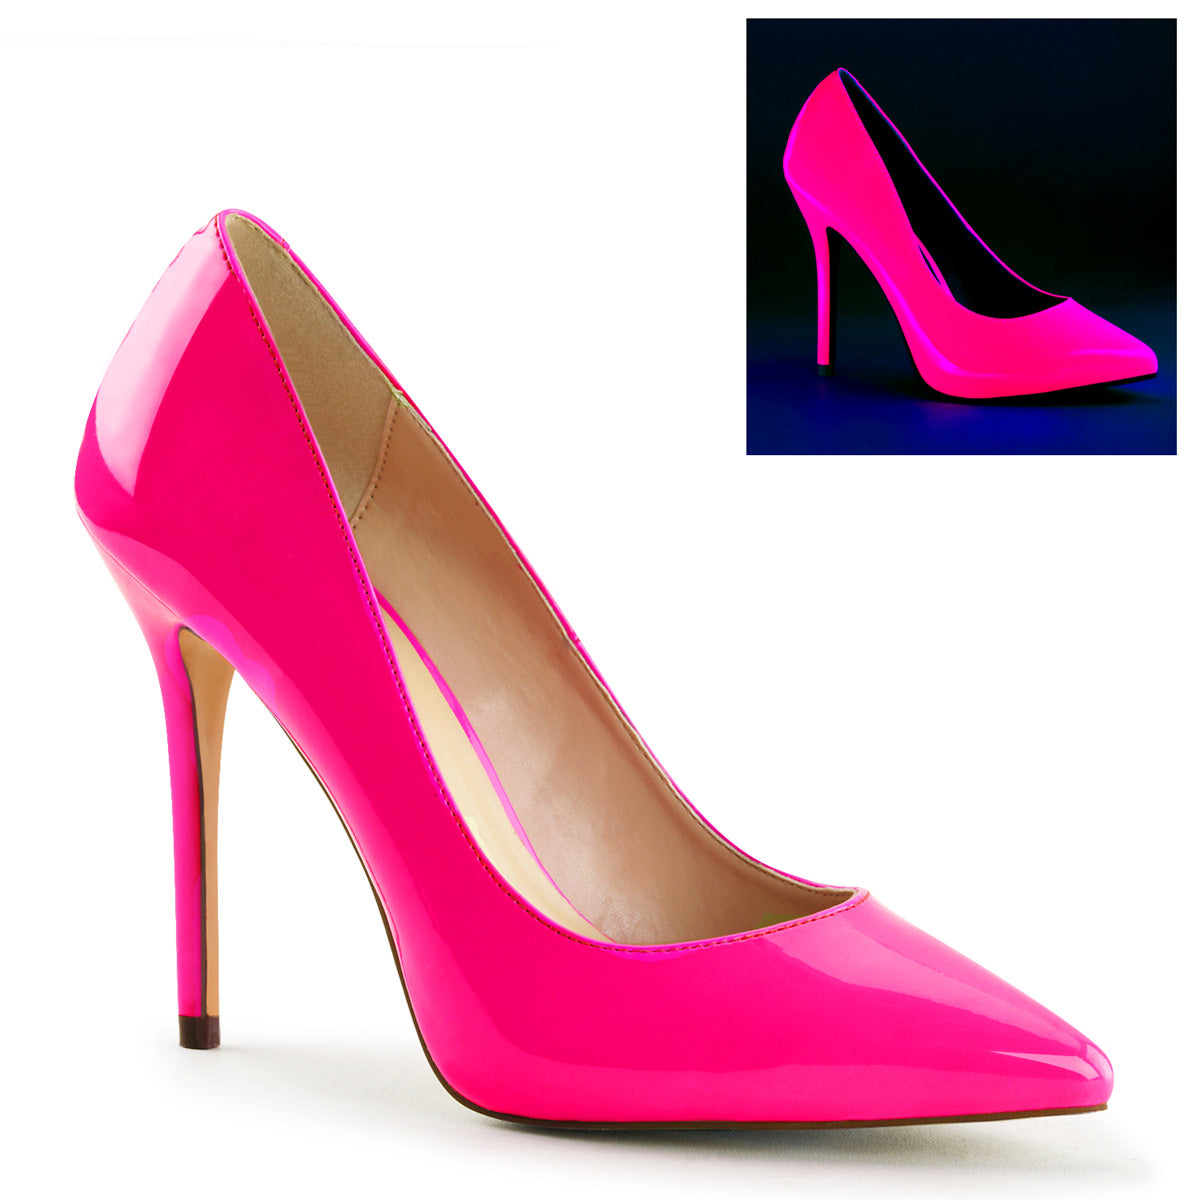 Fuchsia patent leather 5" Amuse Pump right side view.